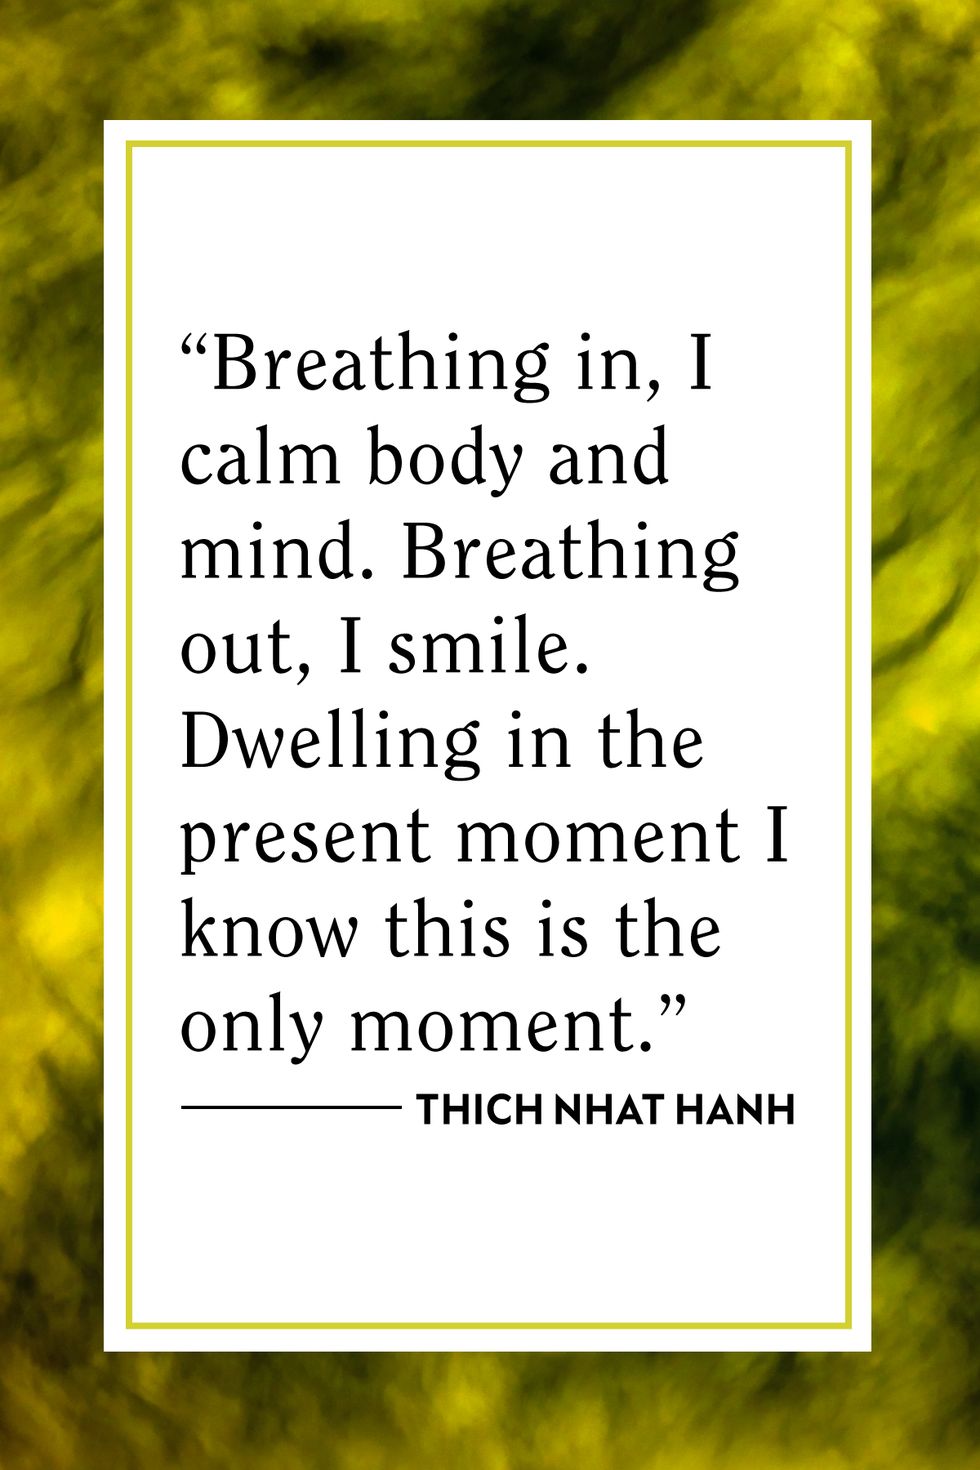 Buddha Power - Breathing in, I calm body and mind.